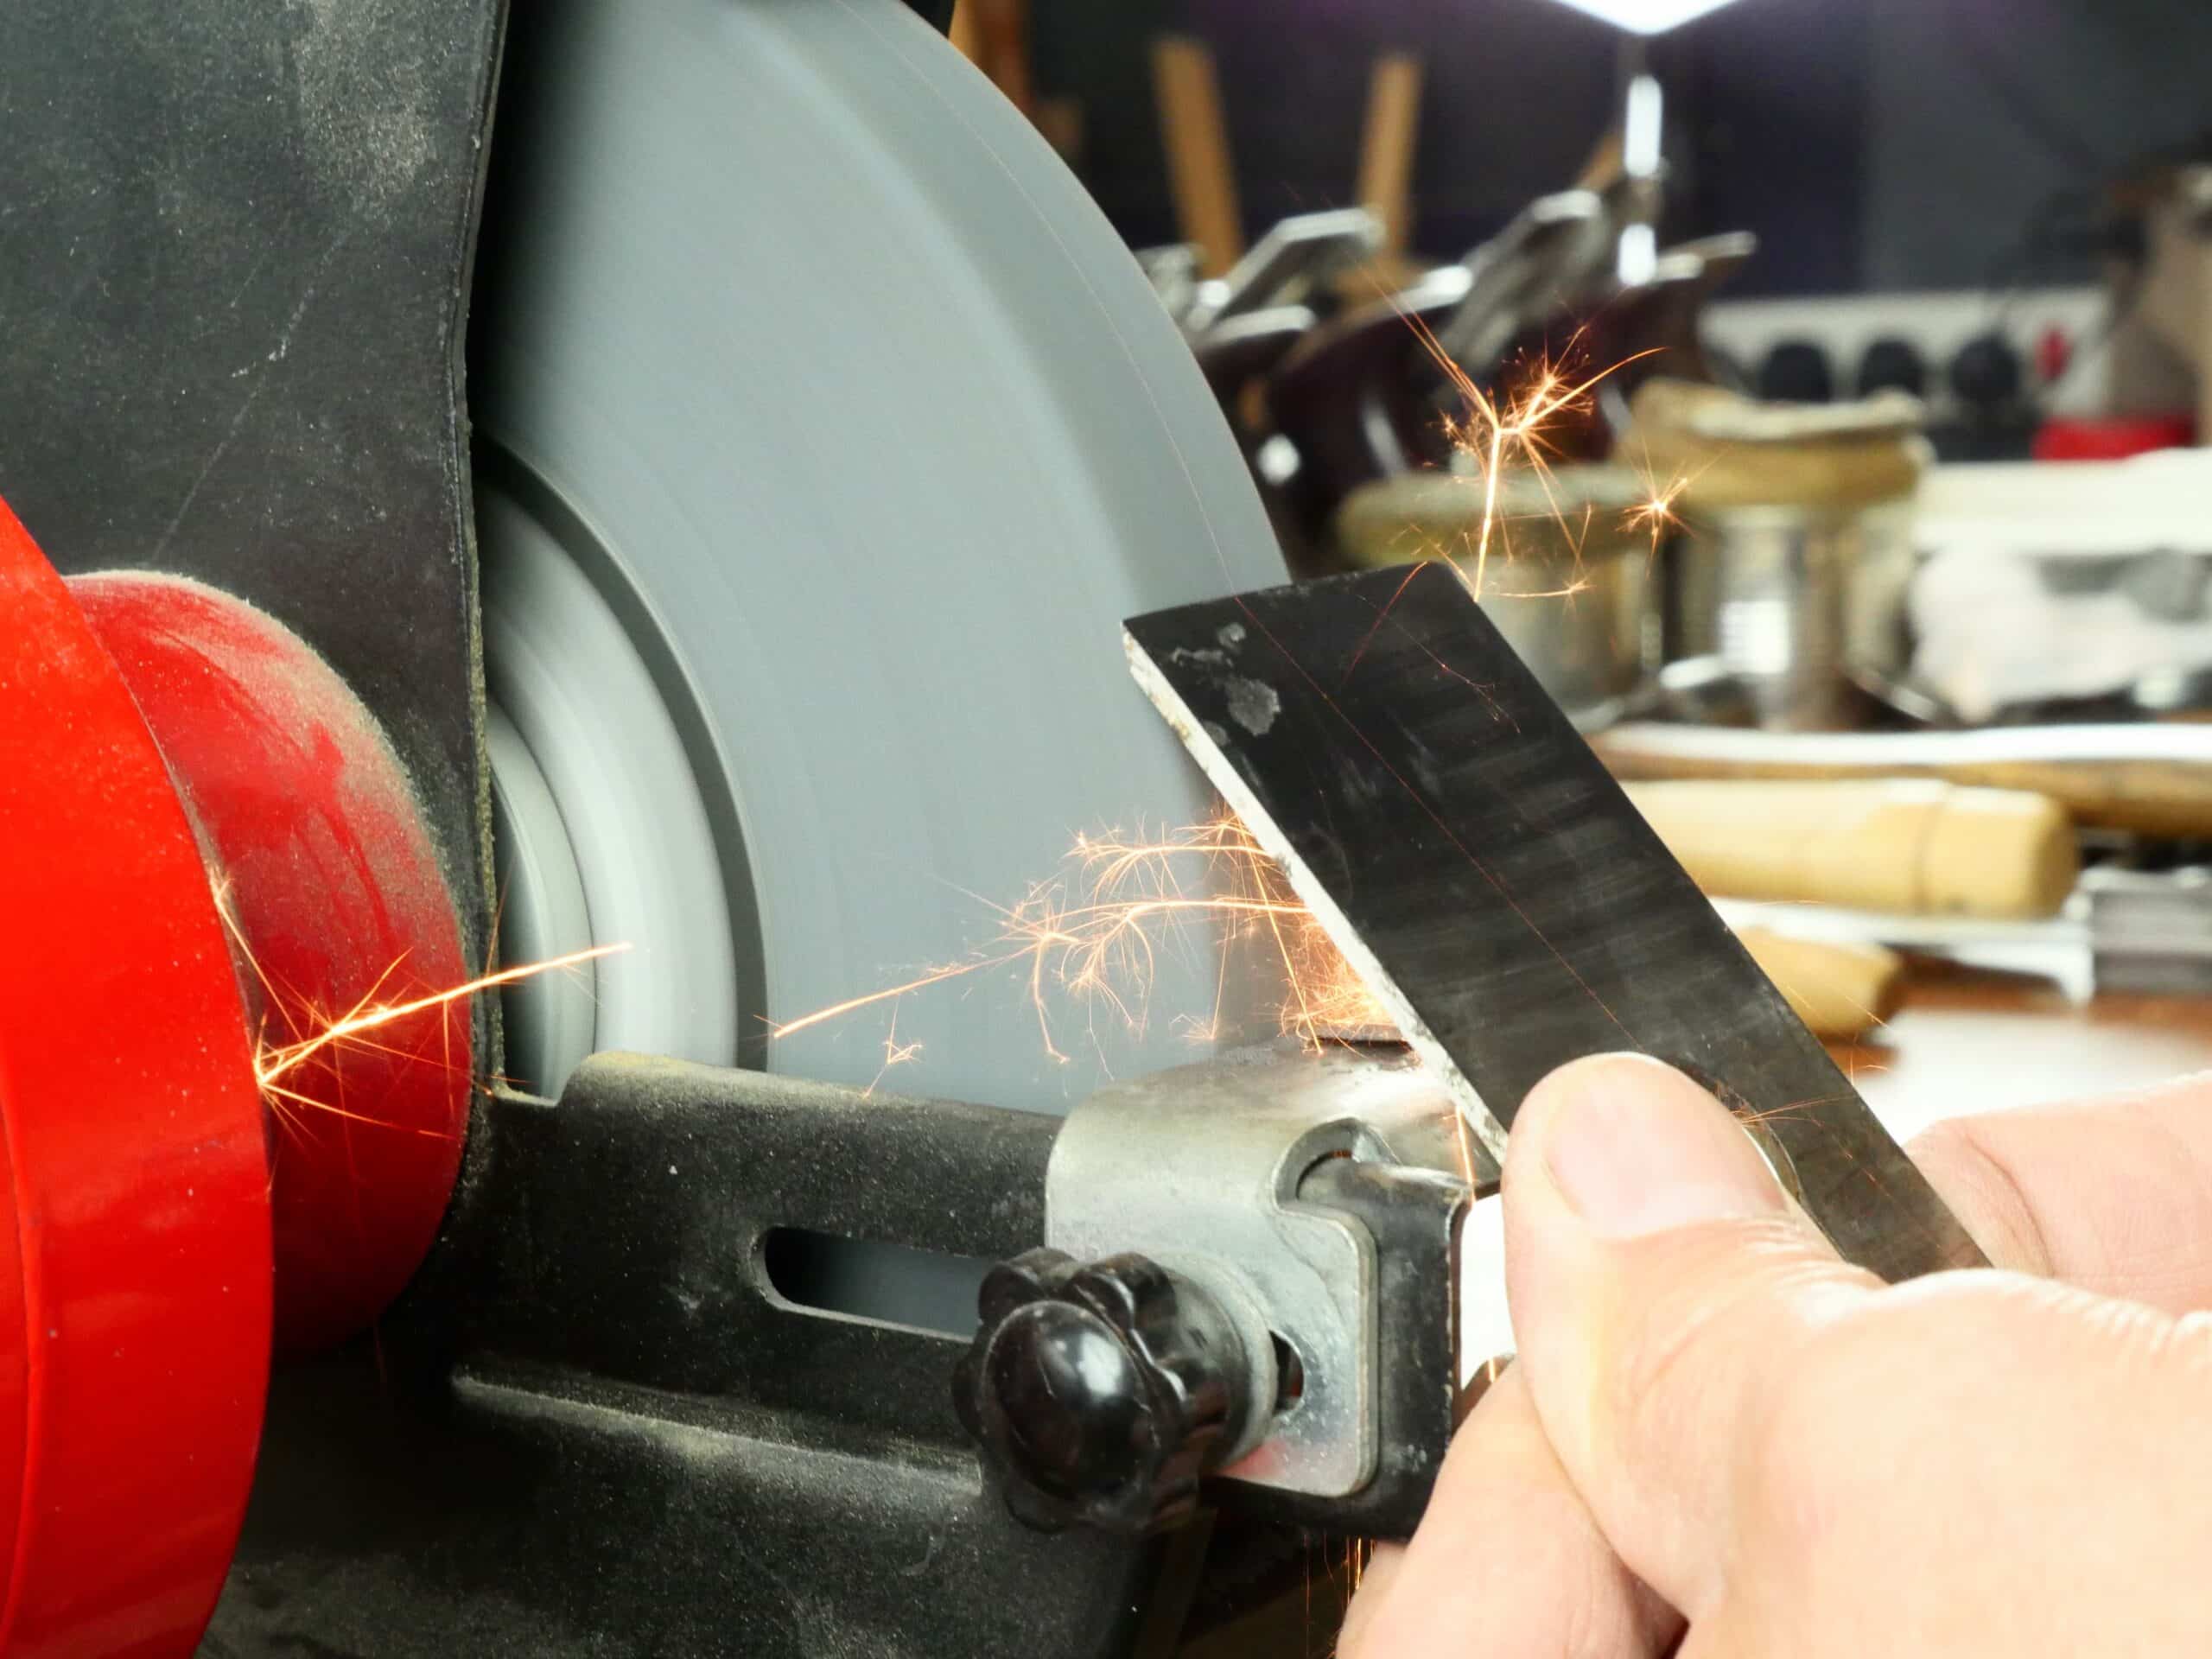 Find Knife Sharpening Angle With Quarters - Video